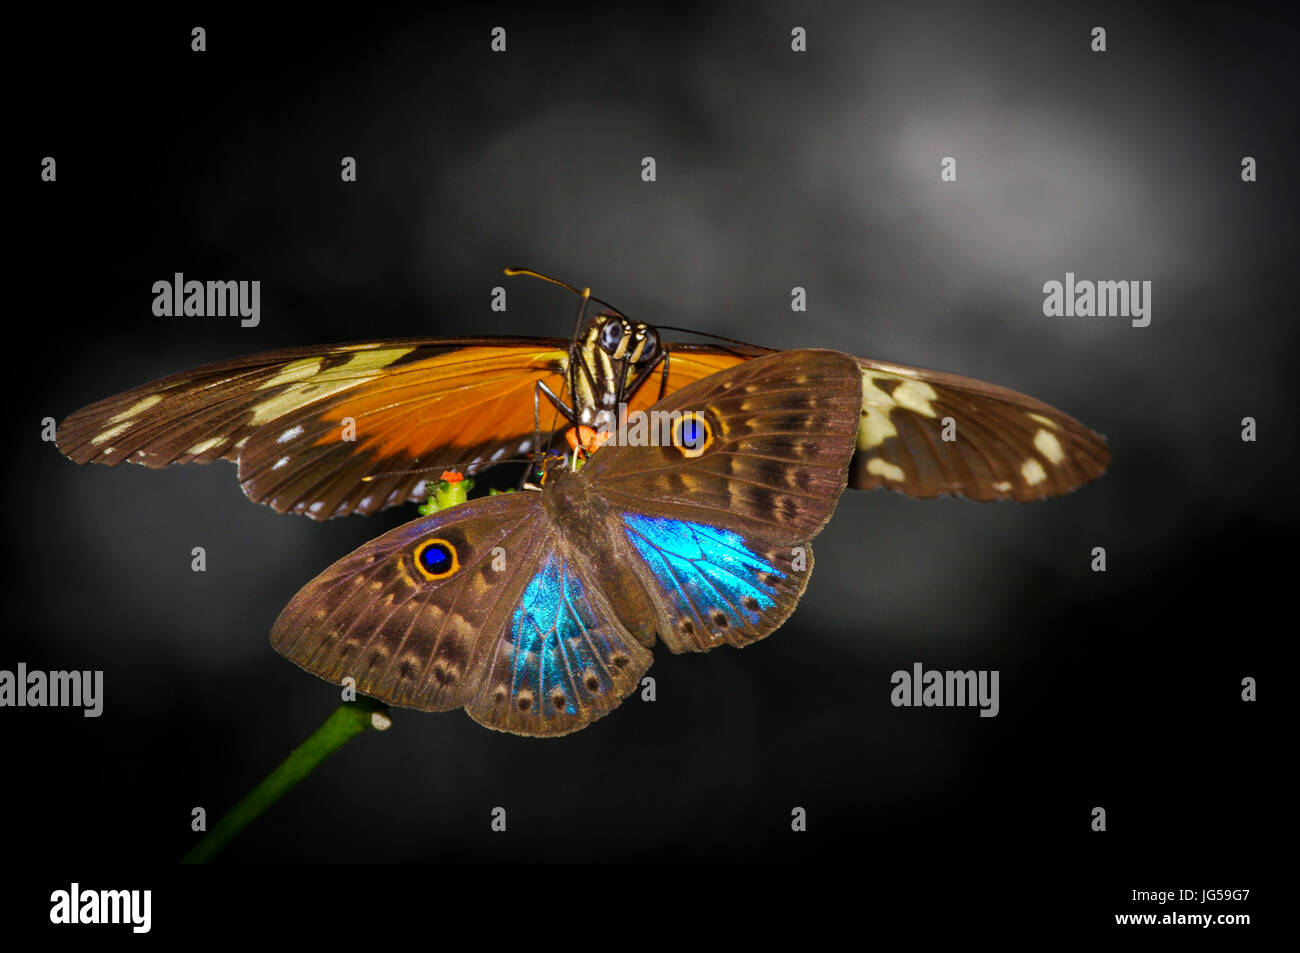 Metalmark and heliconius butterflies on the same flower Stock Photo